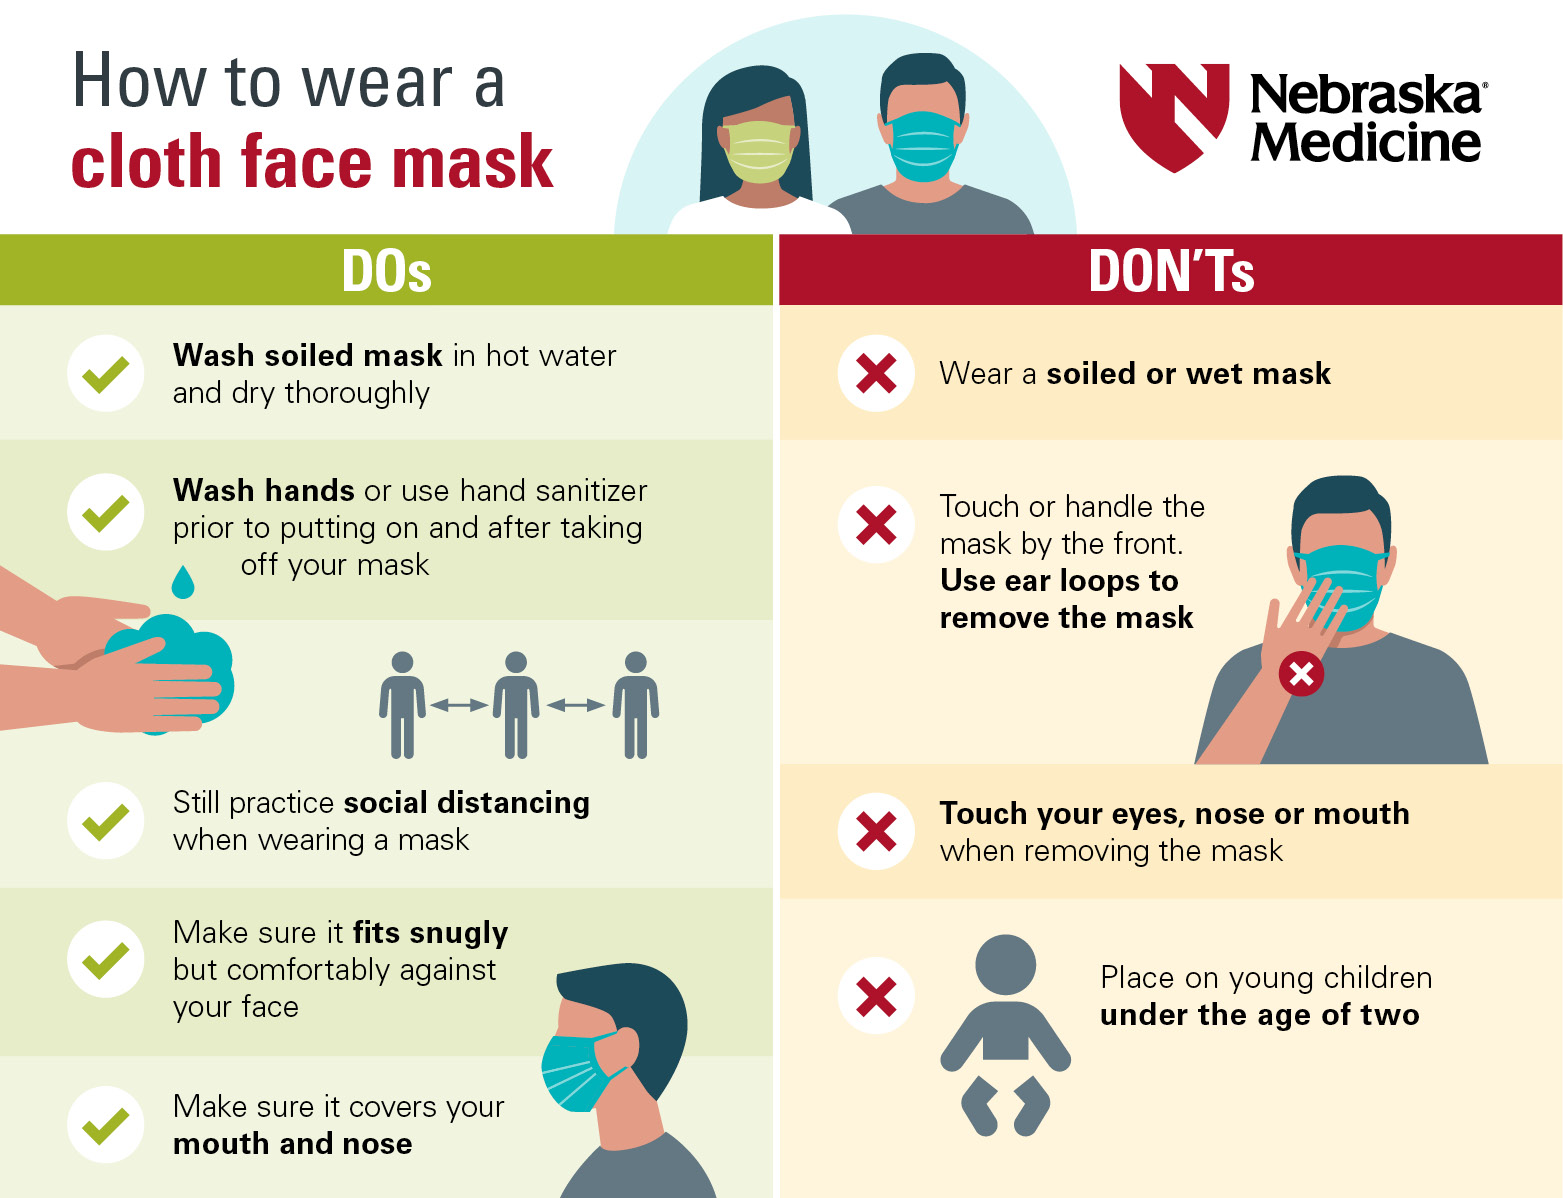 How to wear a cloth face mask